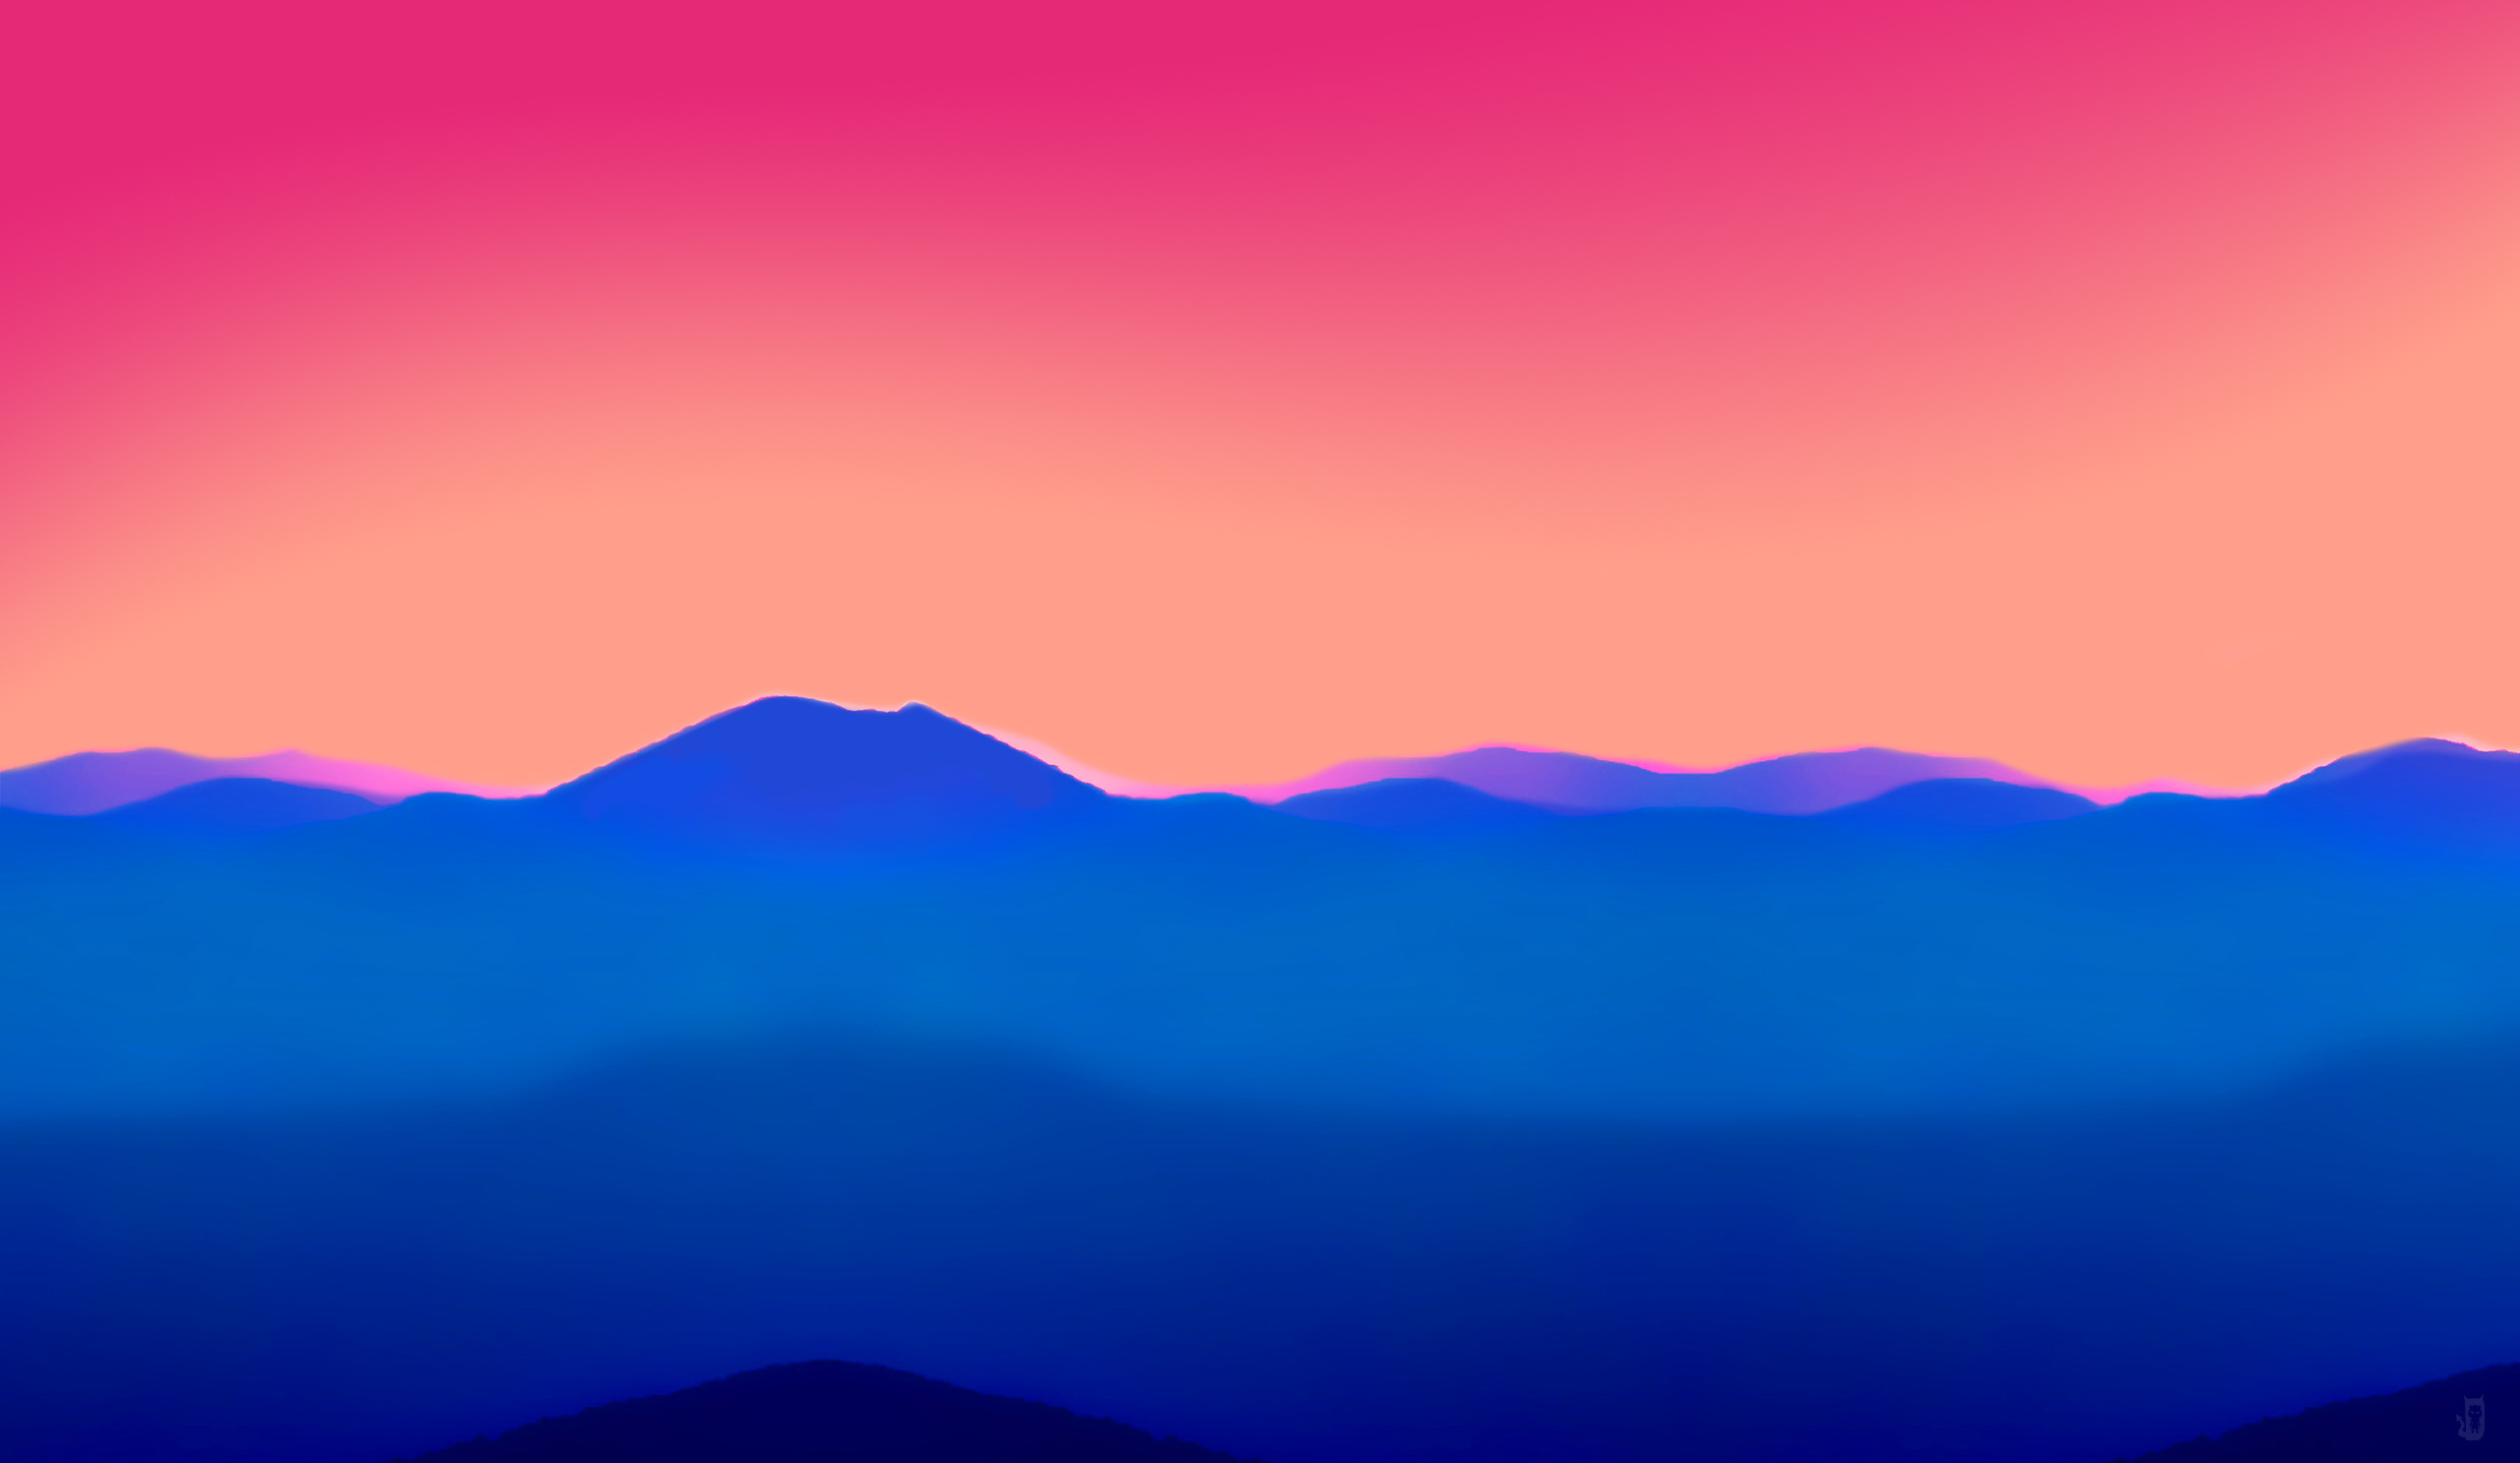 GitHub - DenverCoder1/minimalistic-wallpaper-collection: Minimalistic, flat  art, and colorful, digital nature wallpapers and an API for randomly  selecting them